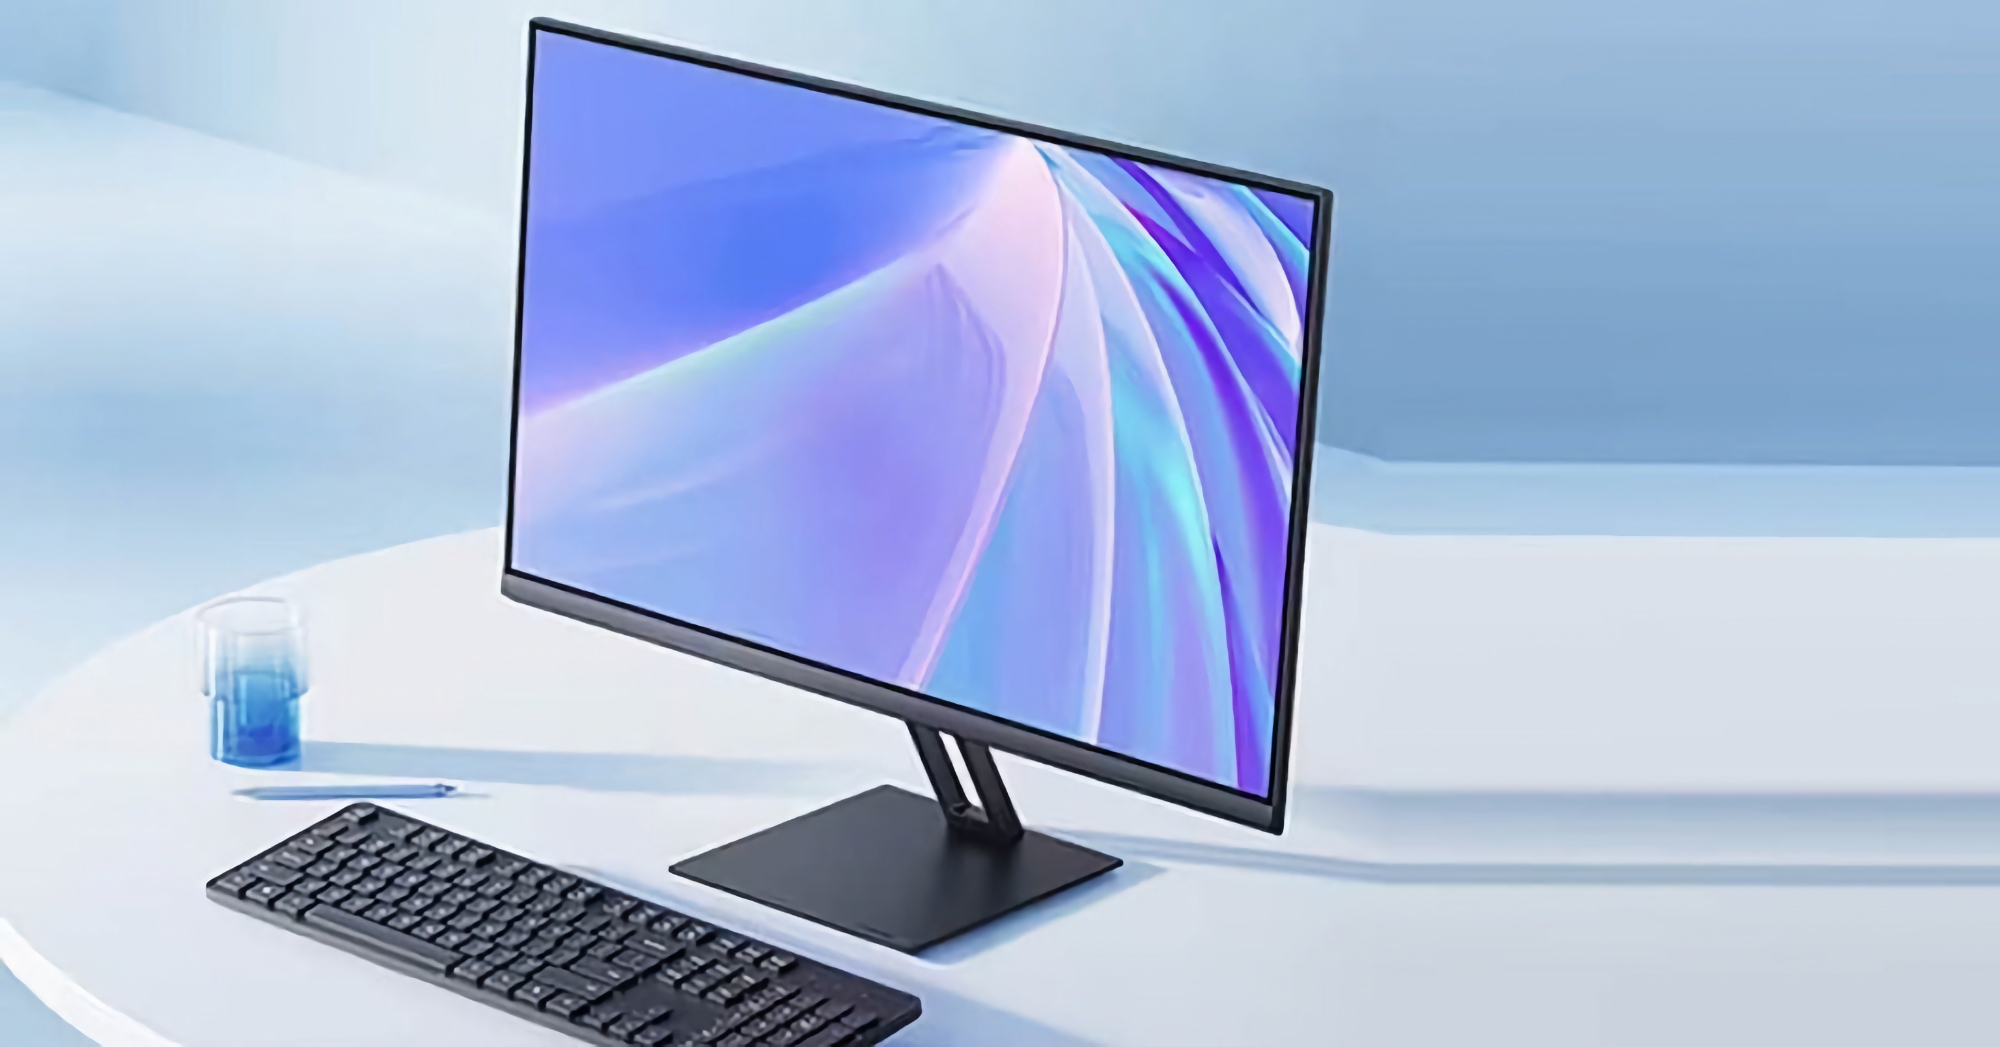 Xiaomi has unveiled a new Redmi monitor with a 24-inch screen at 100Hz for $70